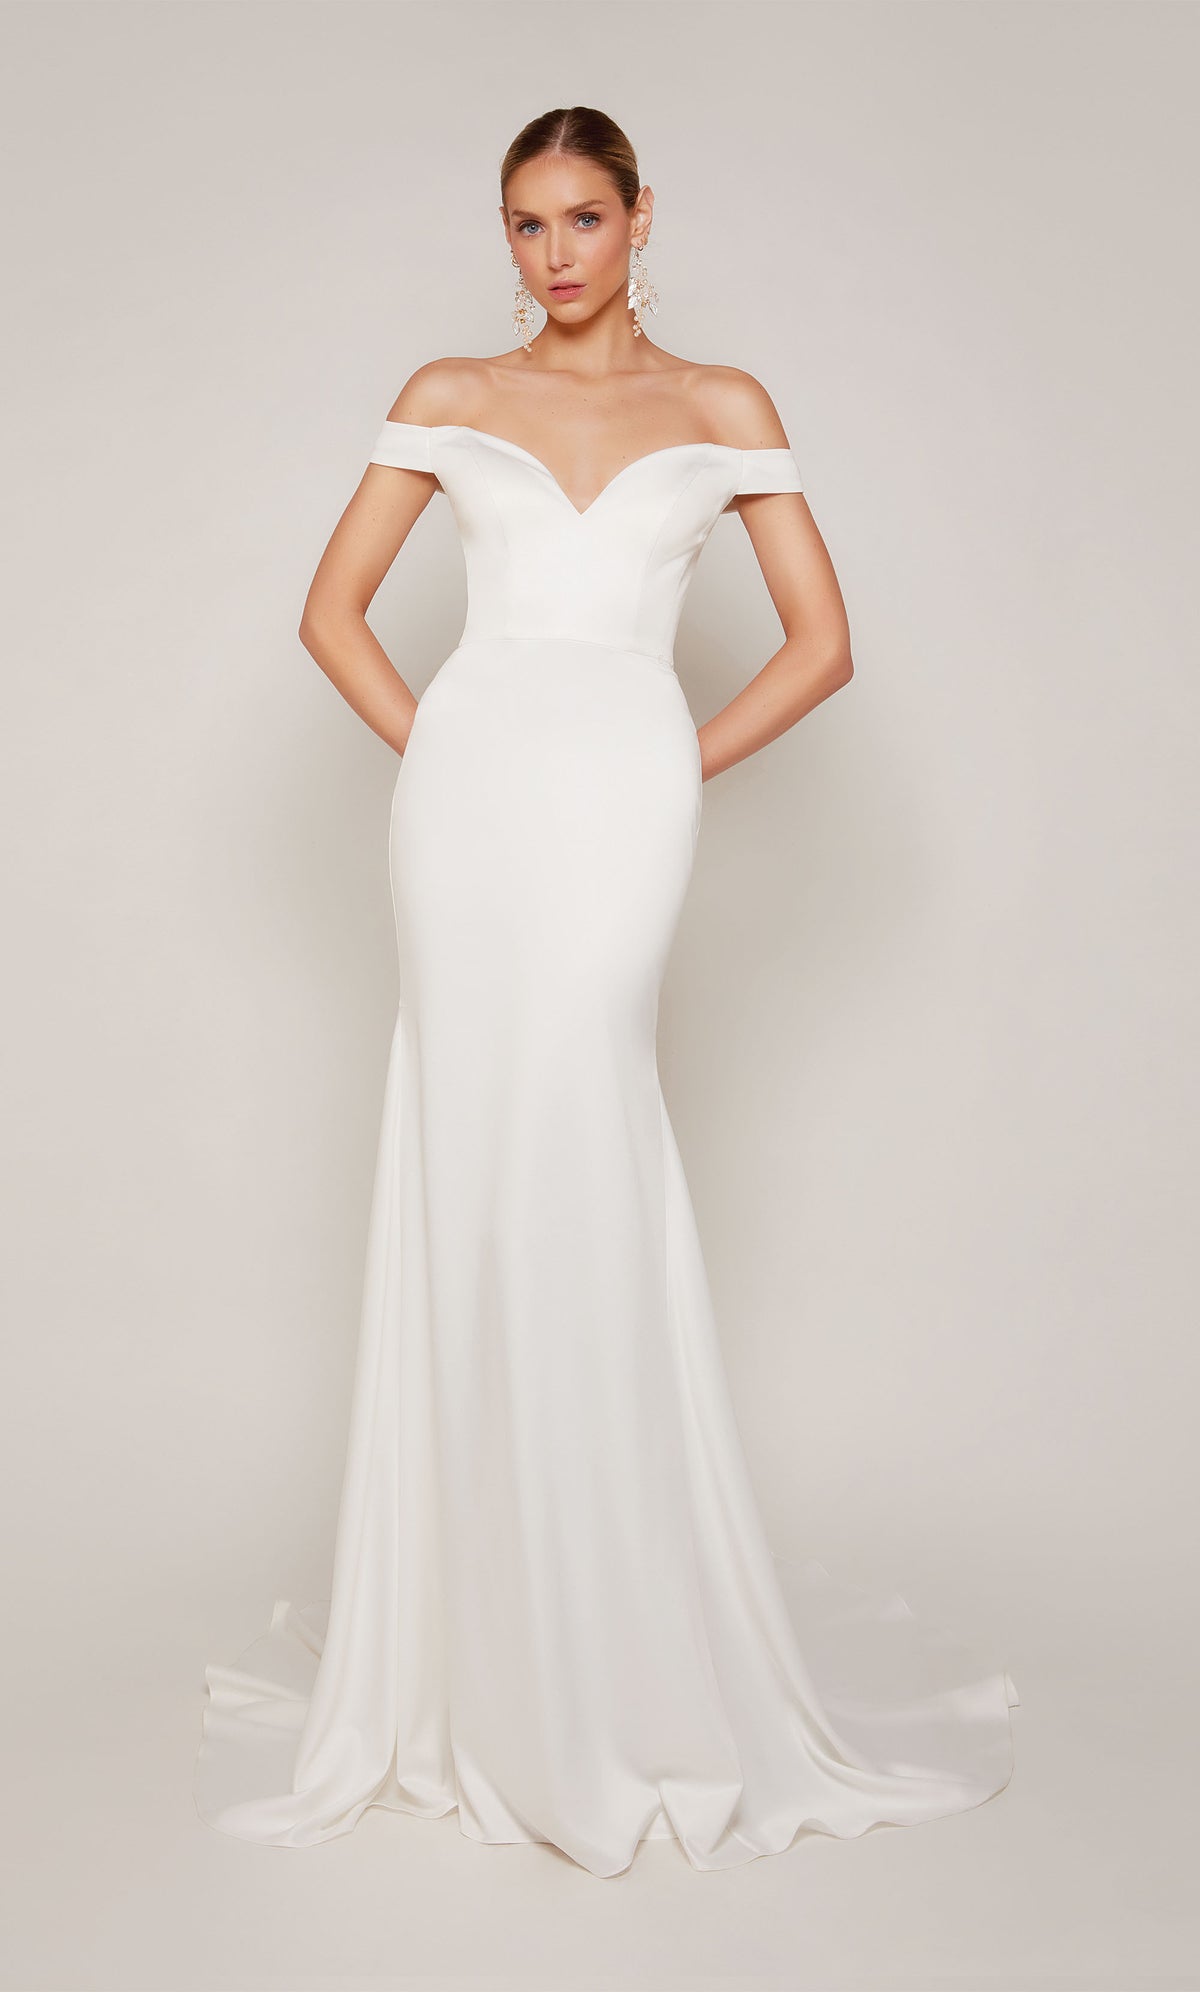 A sophisticated, off-the-shoulder satin wedding dress with a detachable train and satin-covered buttons 